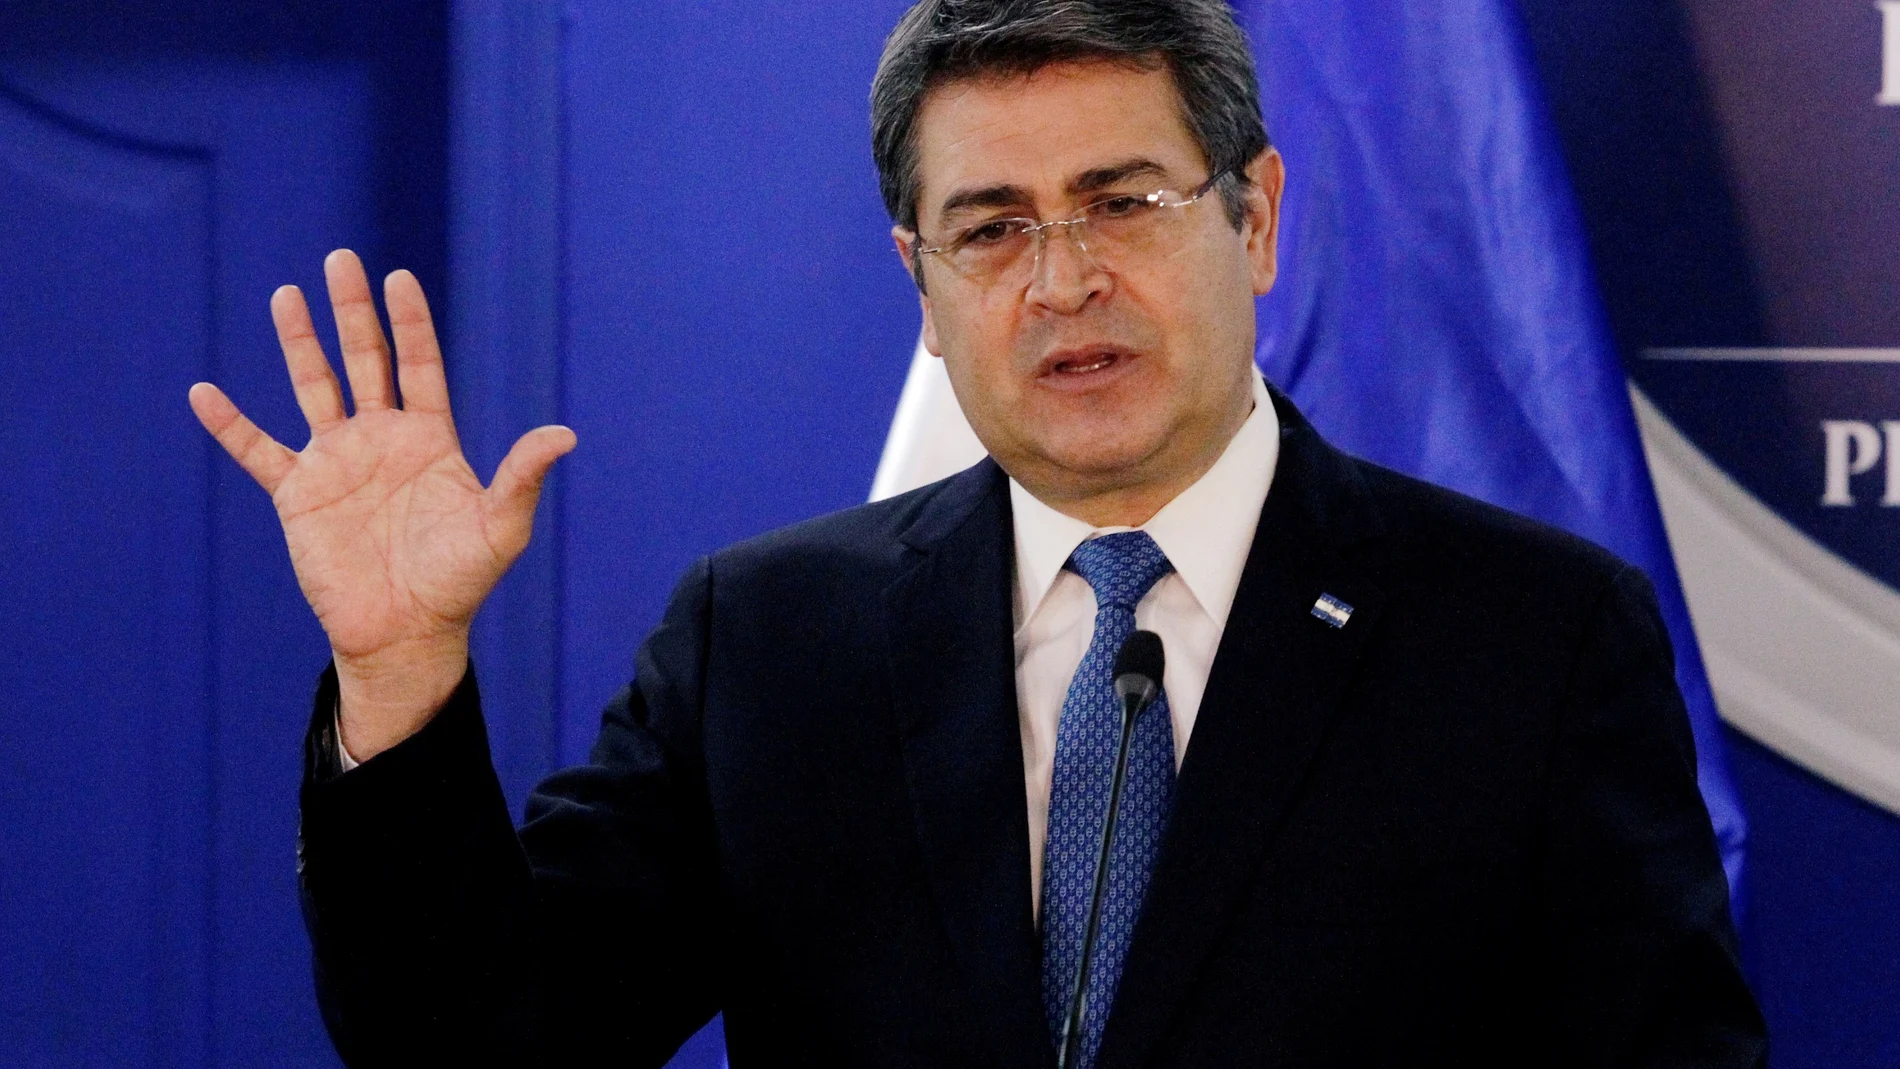 FILE PHOTO: Honduras' president, Juan Orlando Hernandez, speaks during a joint message with U.S. Department of Homeland Security (DHS) acting Secretary Chad Wolf (not pictured), at the Presidential House in Tegucigalpa, Honduras January 9, 2020. REUTERS/Jorge Cabrera/File Photo